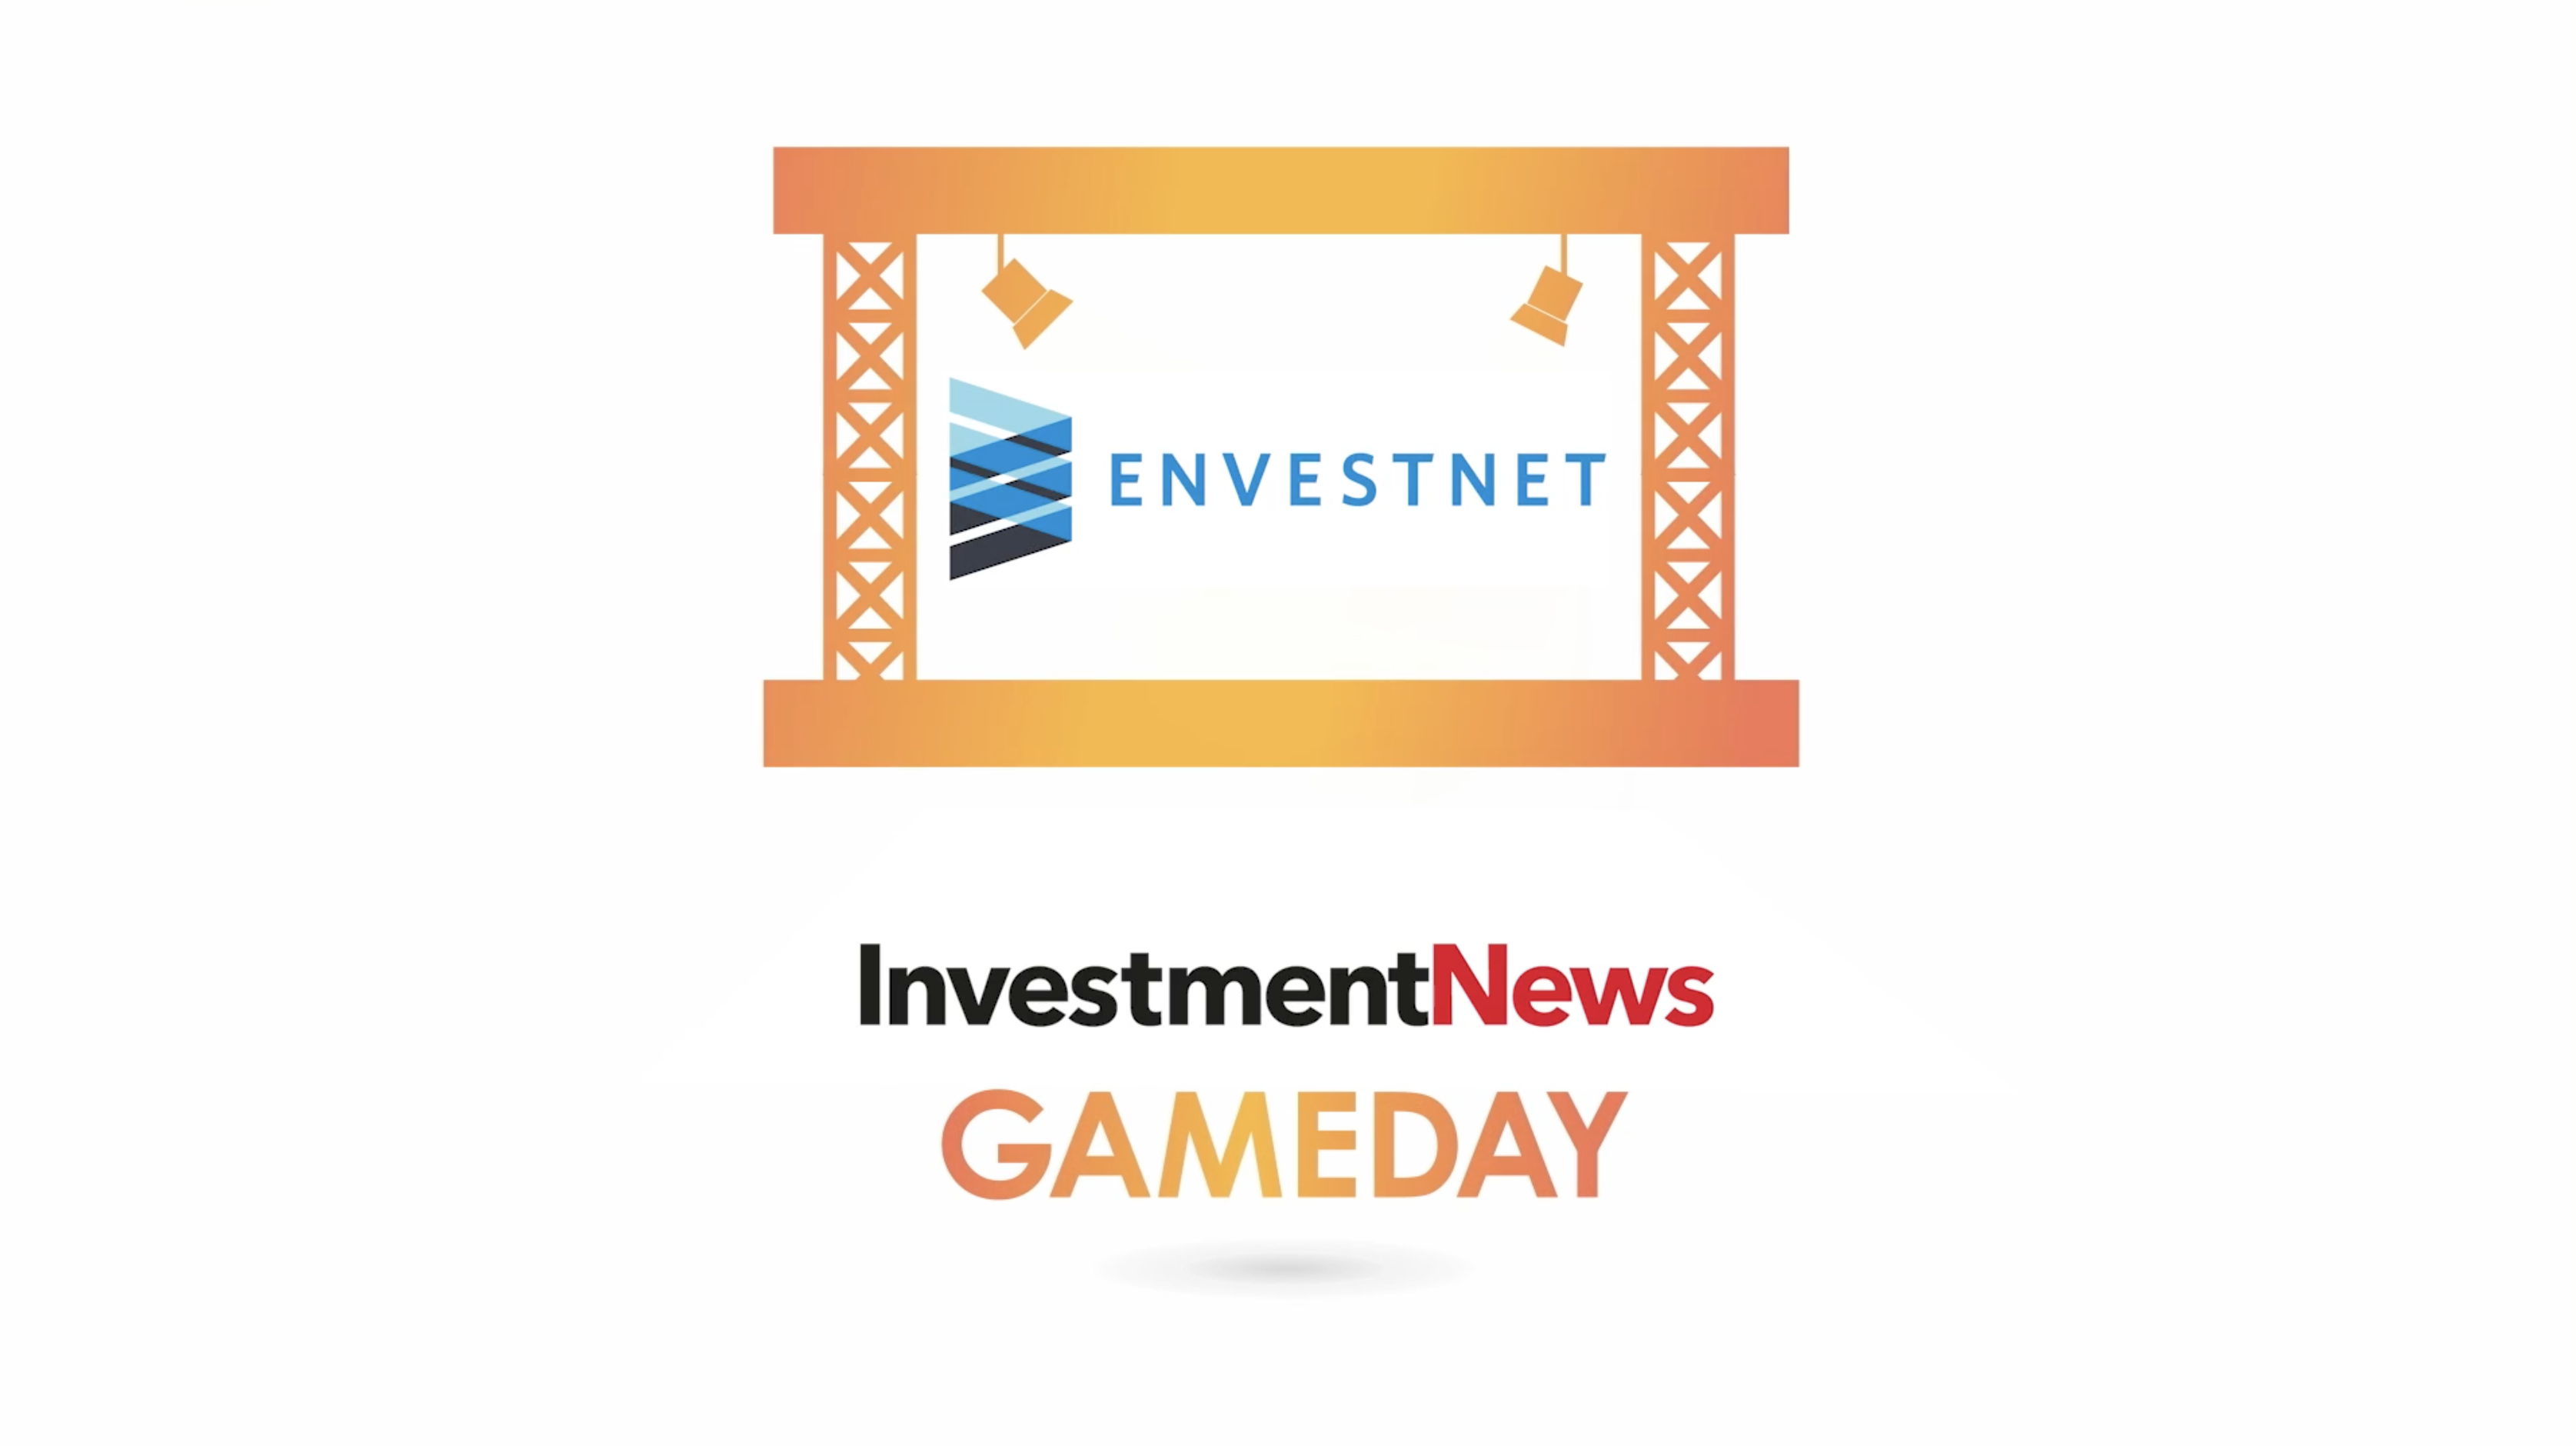 Leveraging data, connecting digitally are new keys to advisor success, Envestnet CEO says